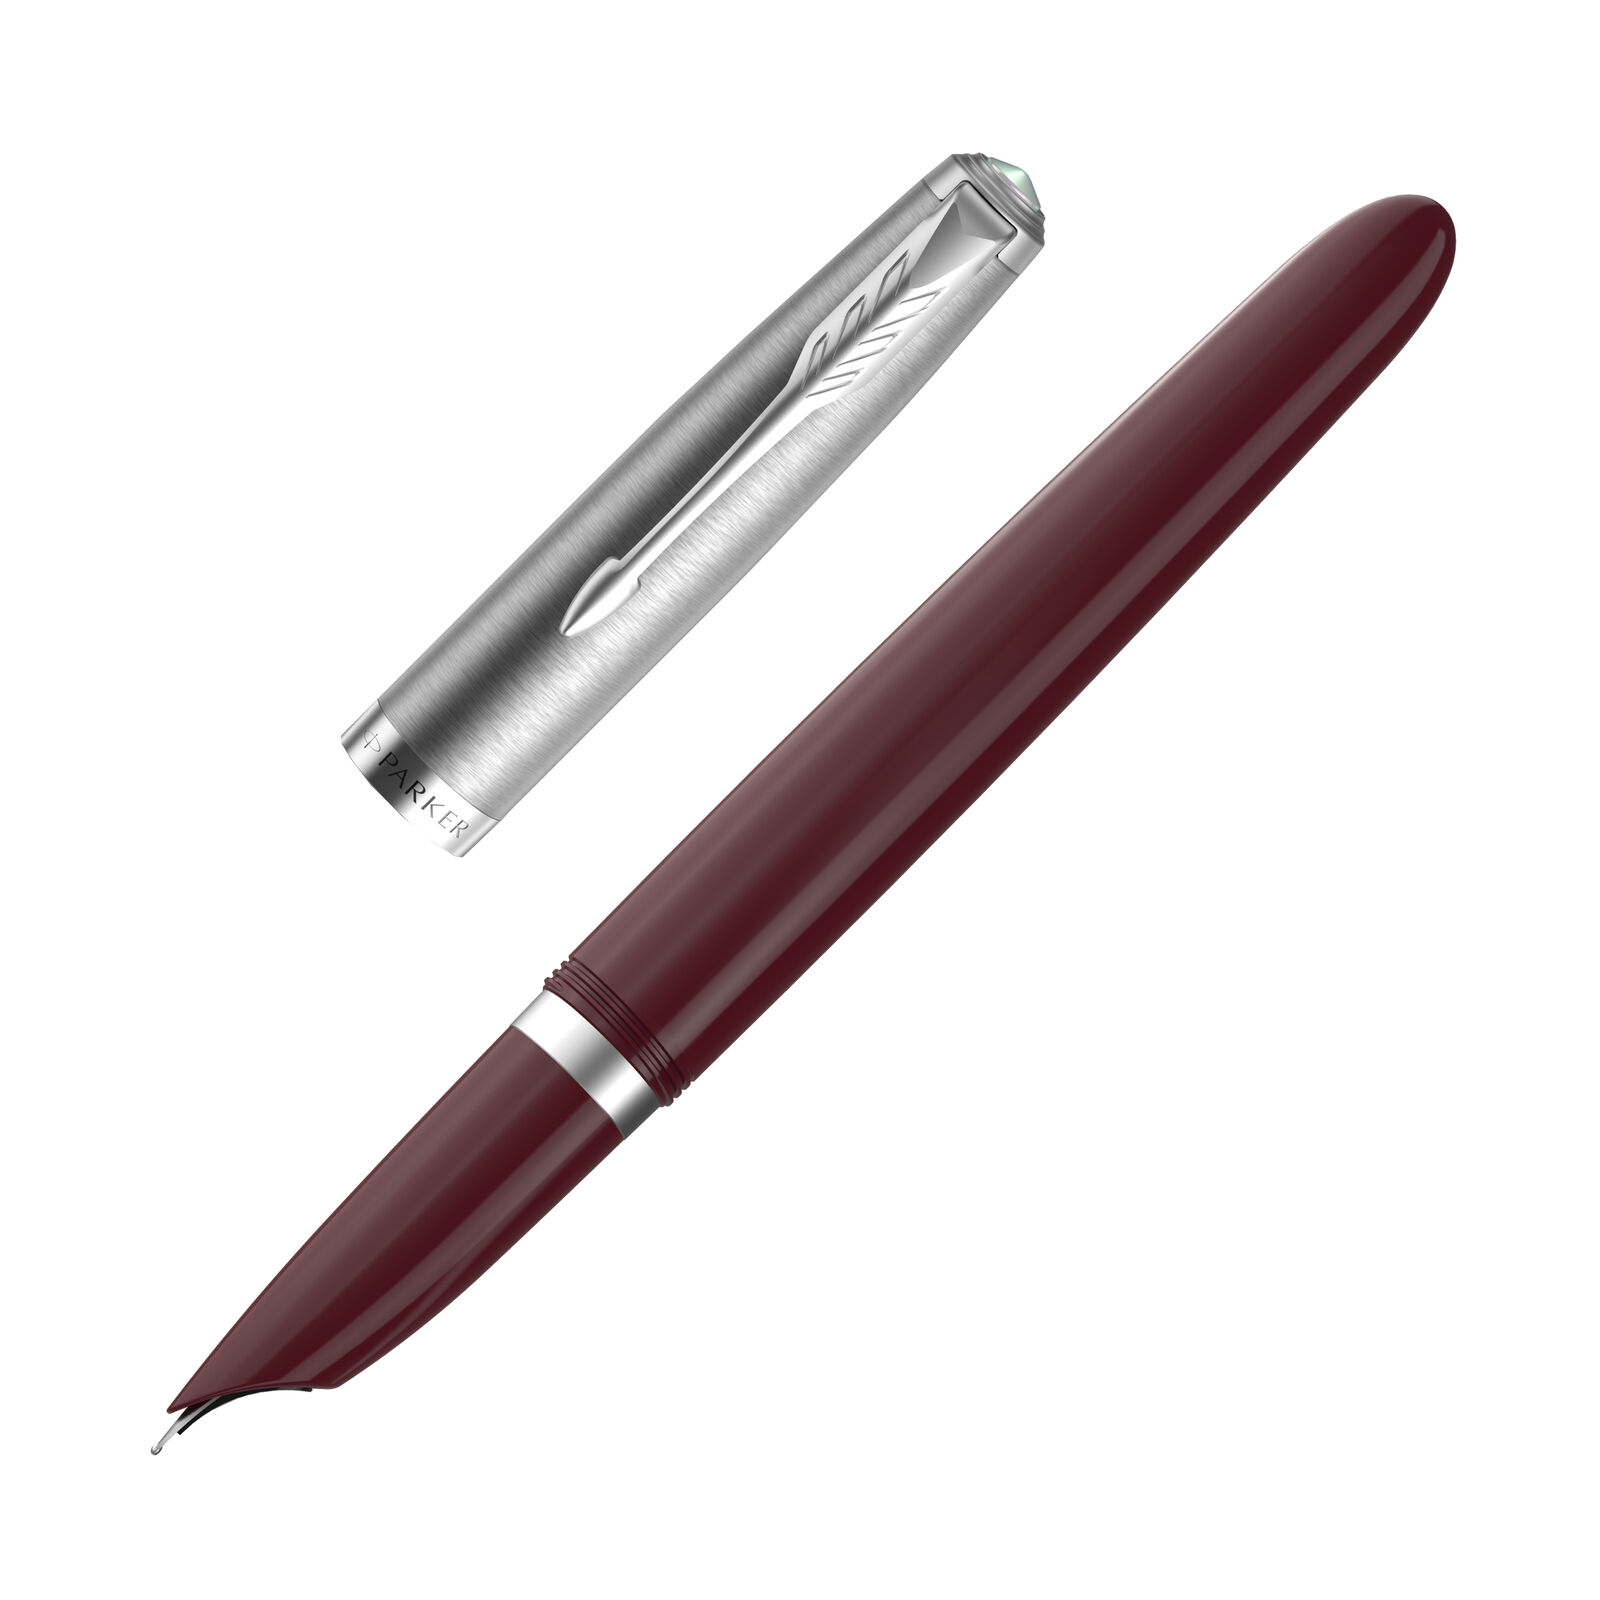 Parker 51 Fountain Pen in Burgundy with Chrome Trim - Fine Point - NEW in Box